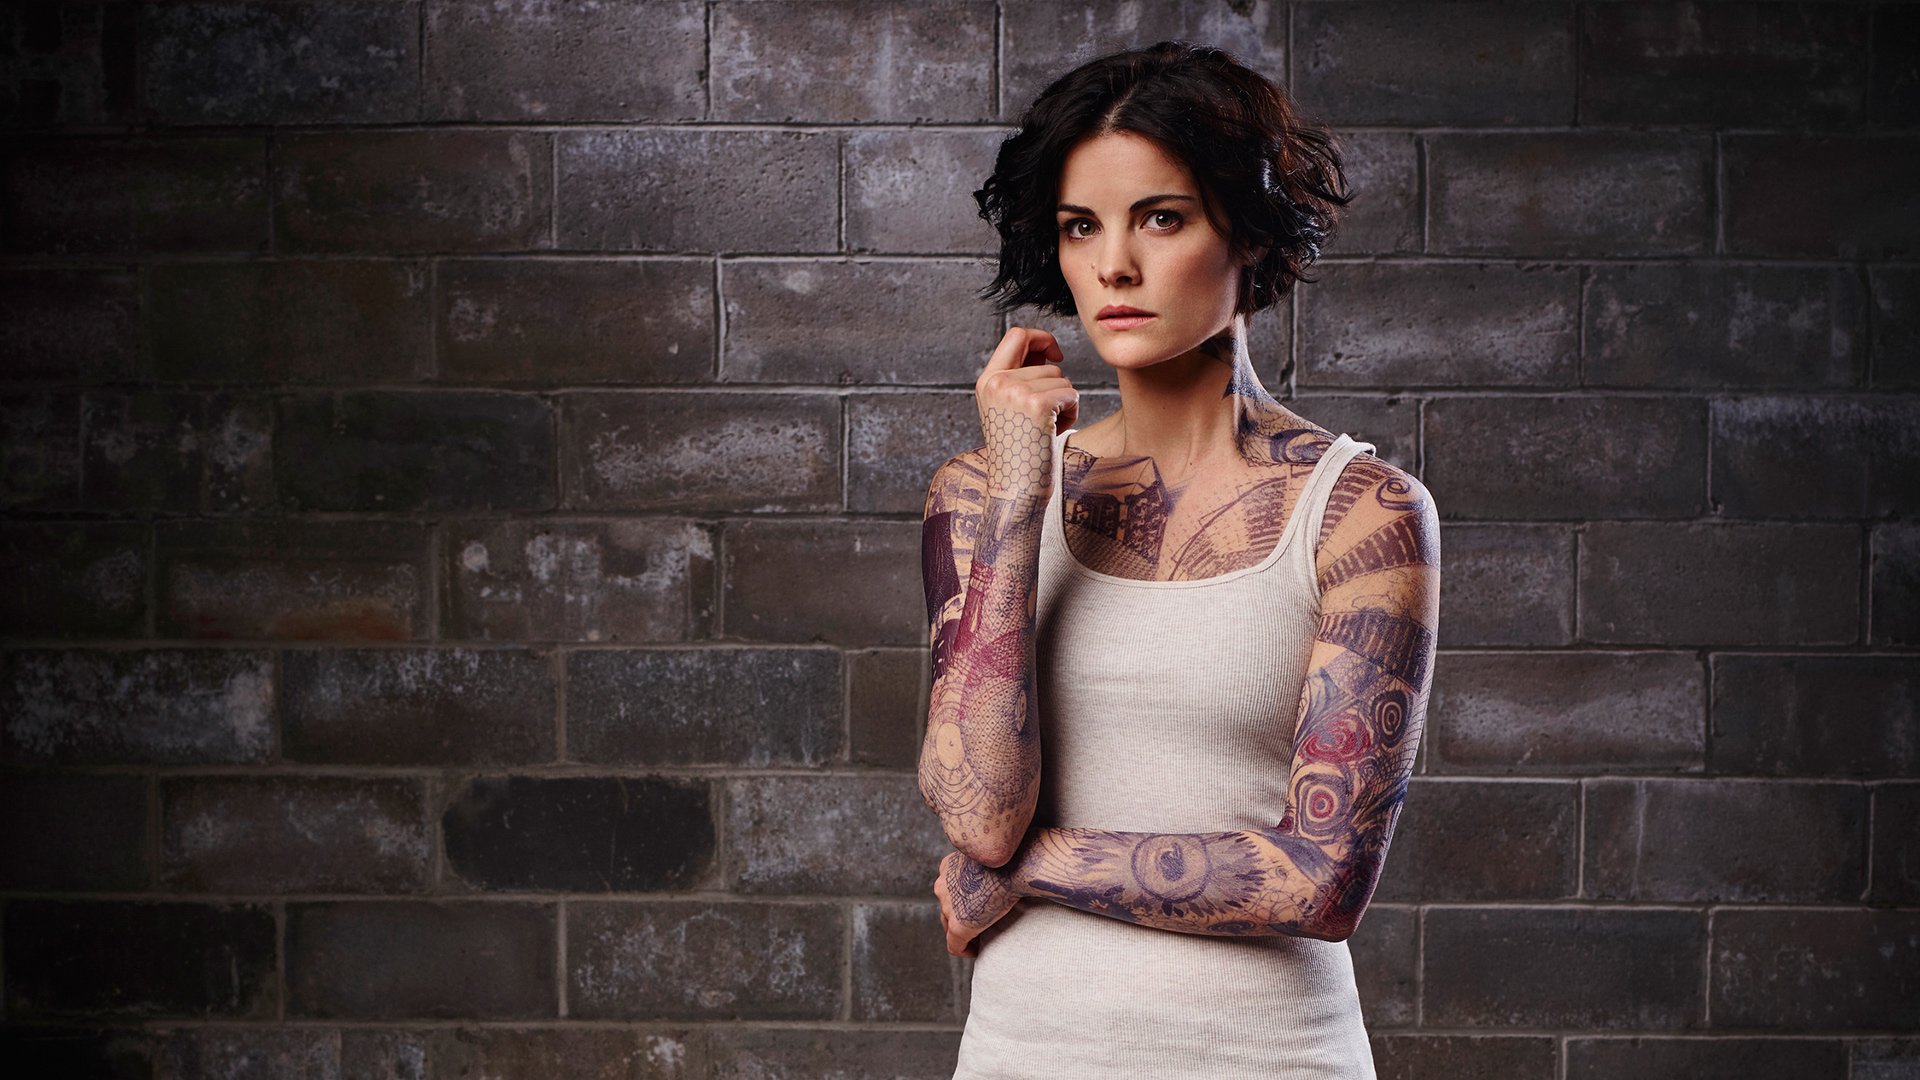 The M Interview: Jaimie Alexander on being nude and 